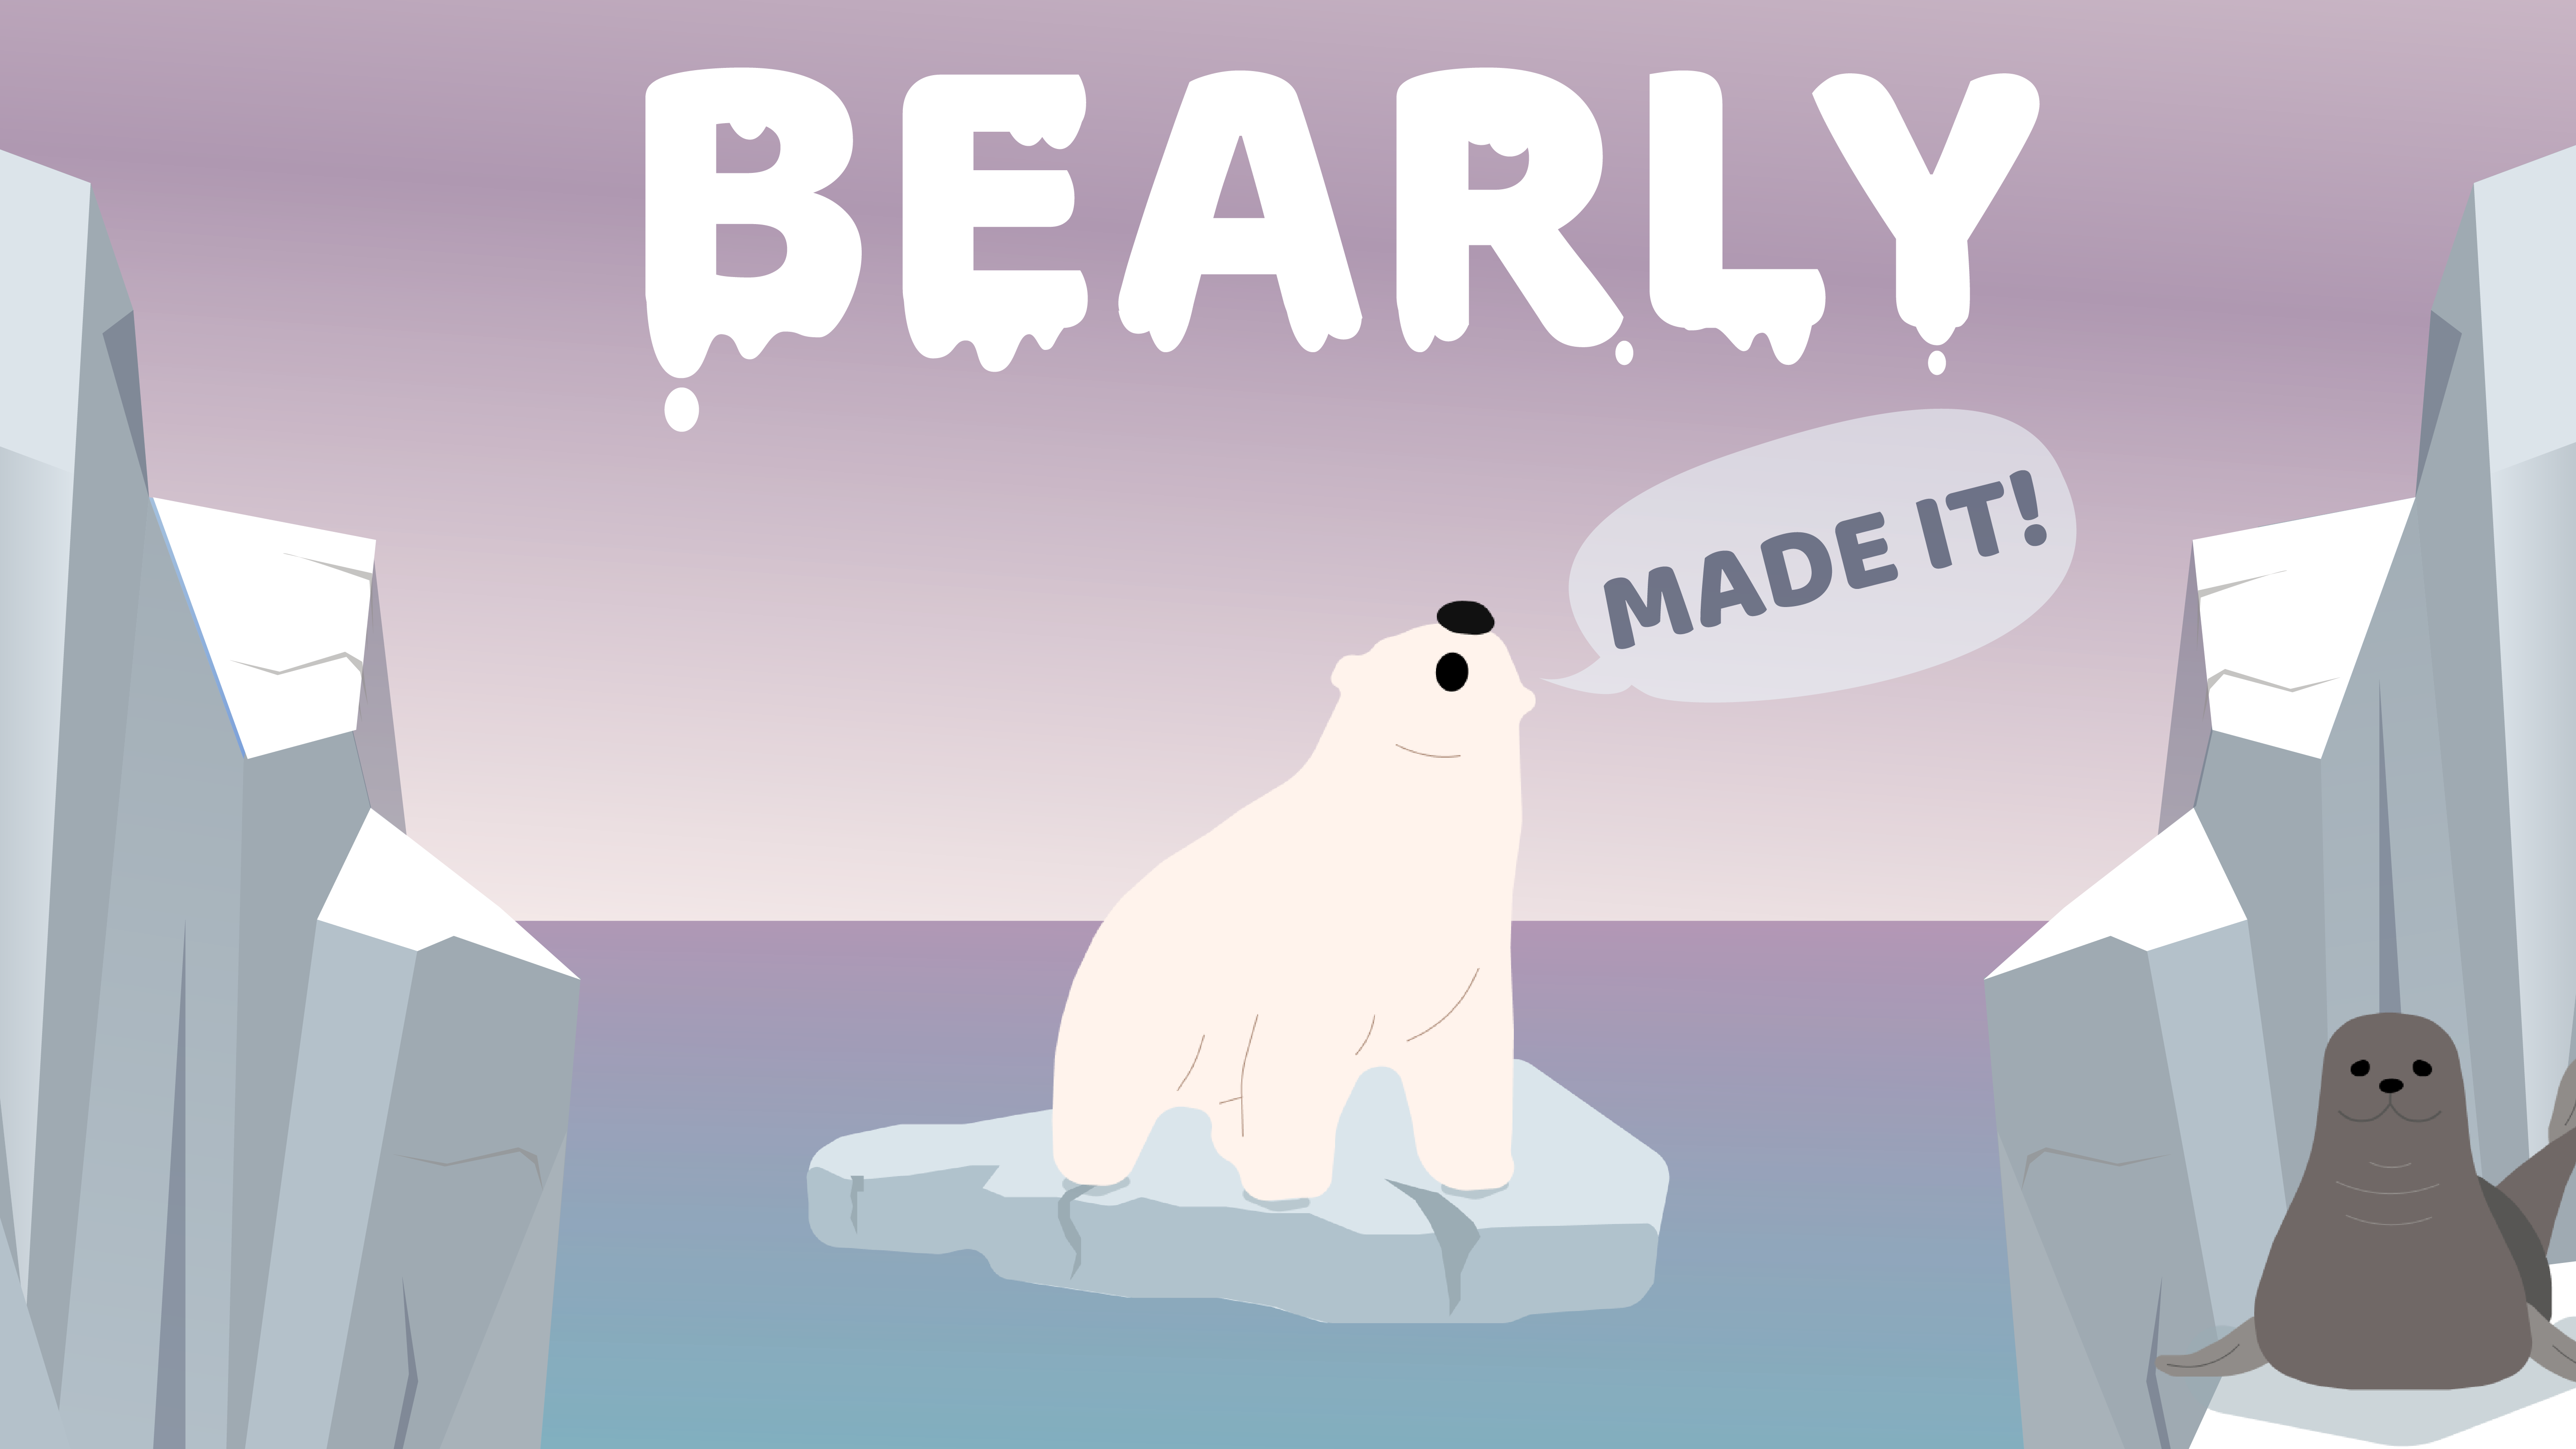 Bearly made it!